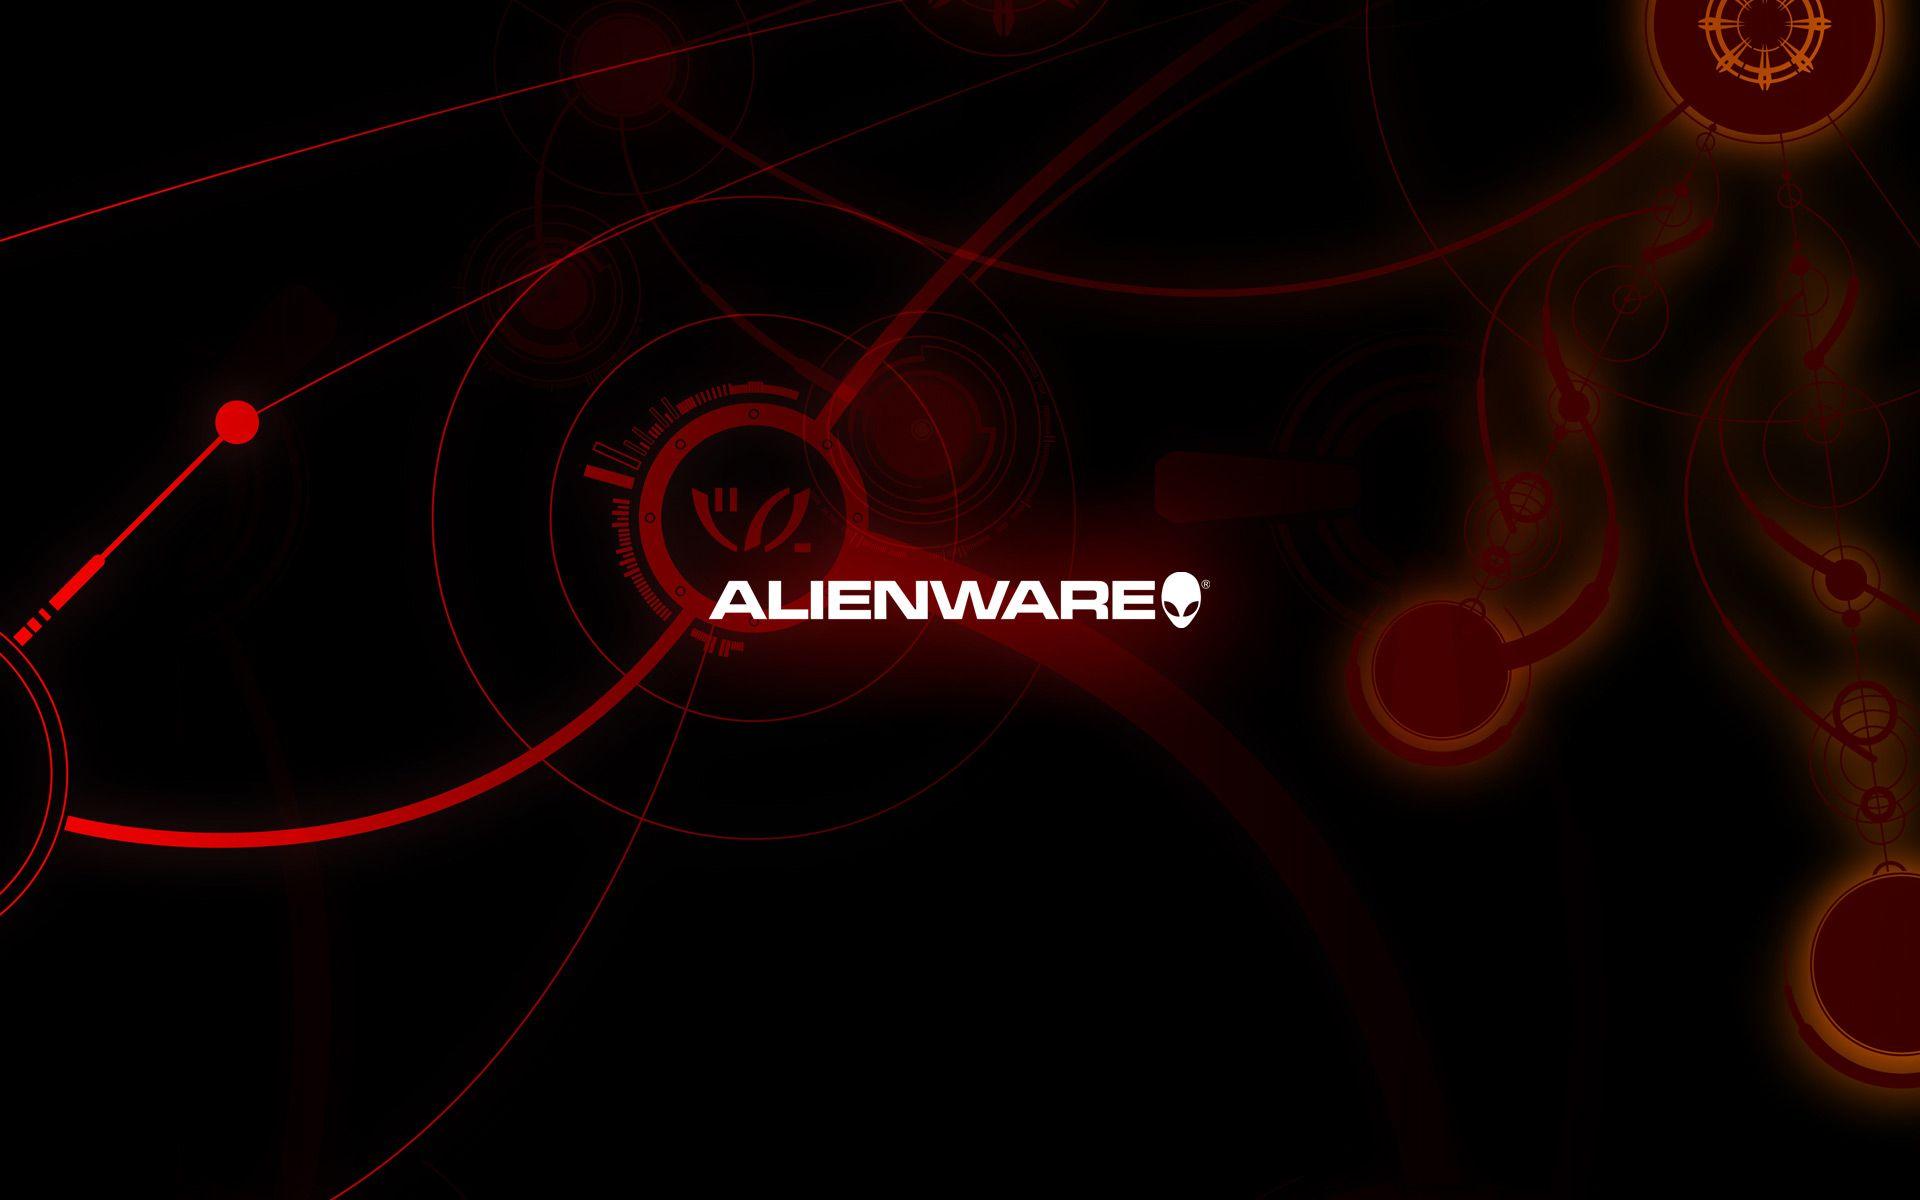 HOW TO: Restore the Alienware 'Look and Feel' after a clean install